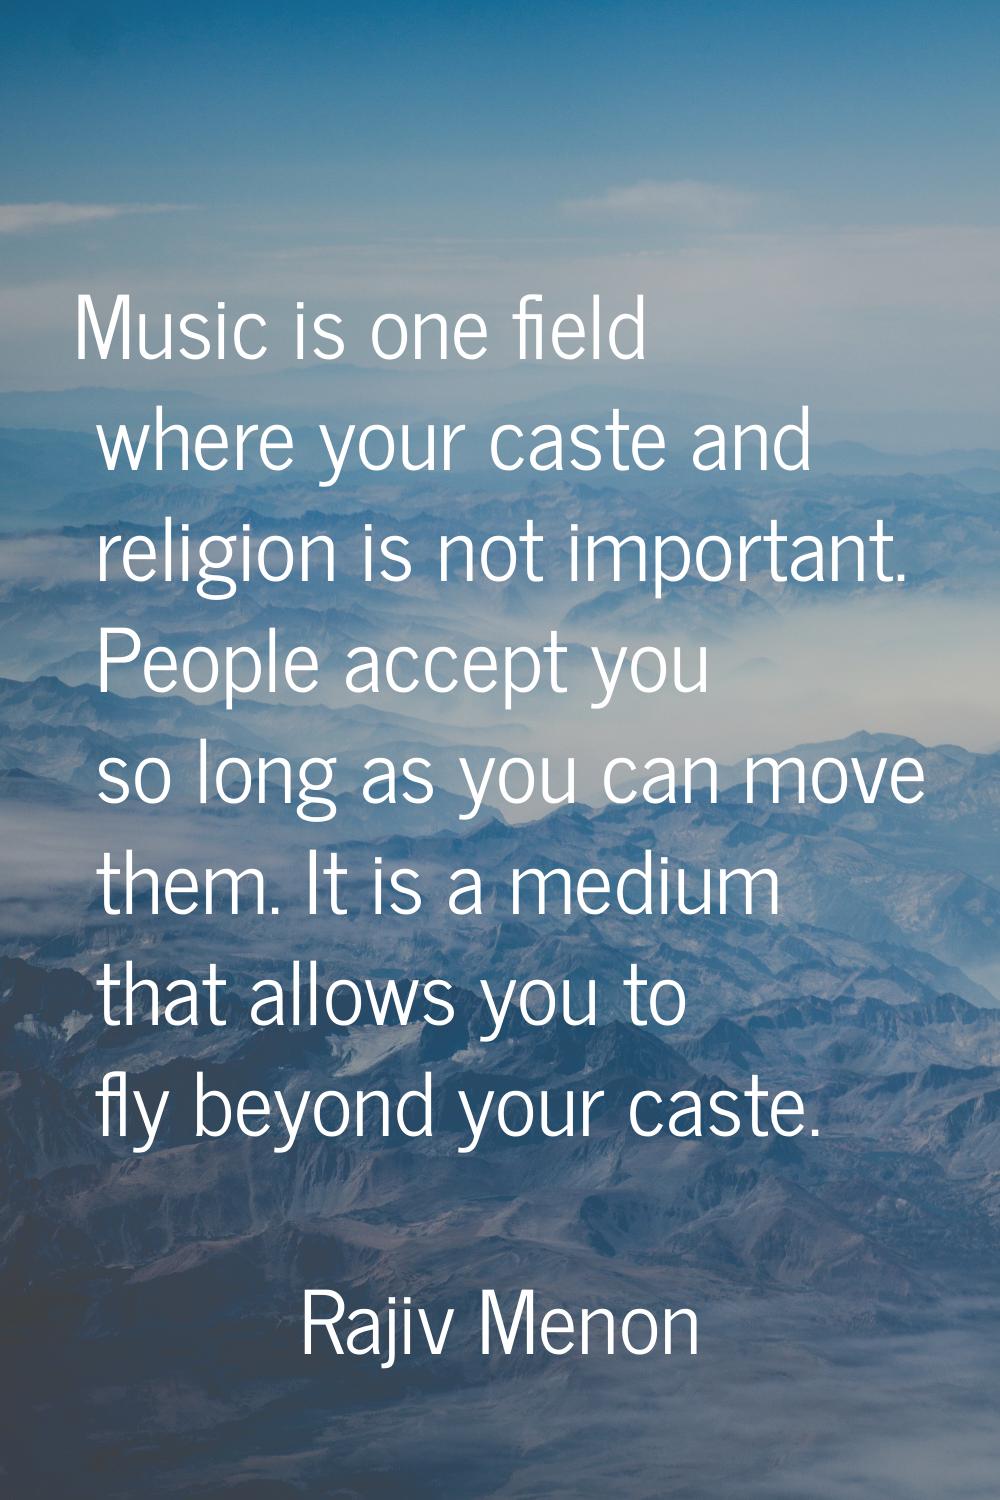 Music is one field where your caste and religion is not important. People accept you so long as you